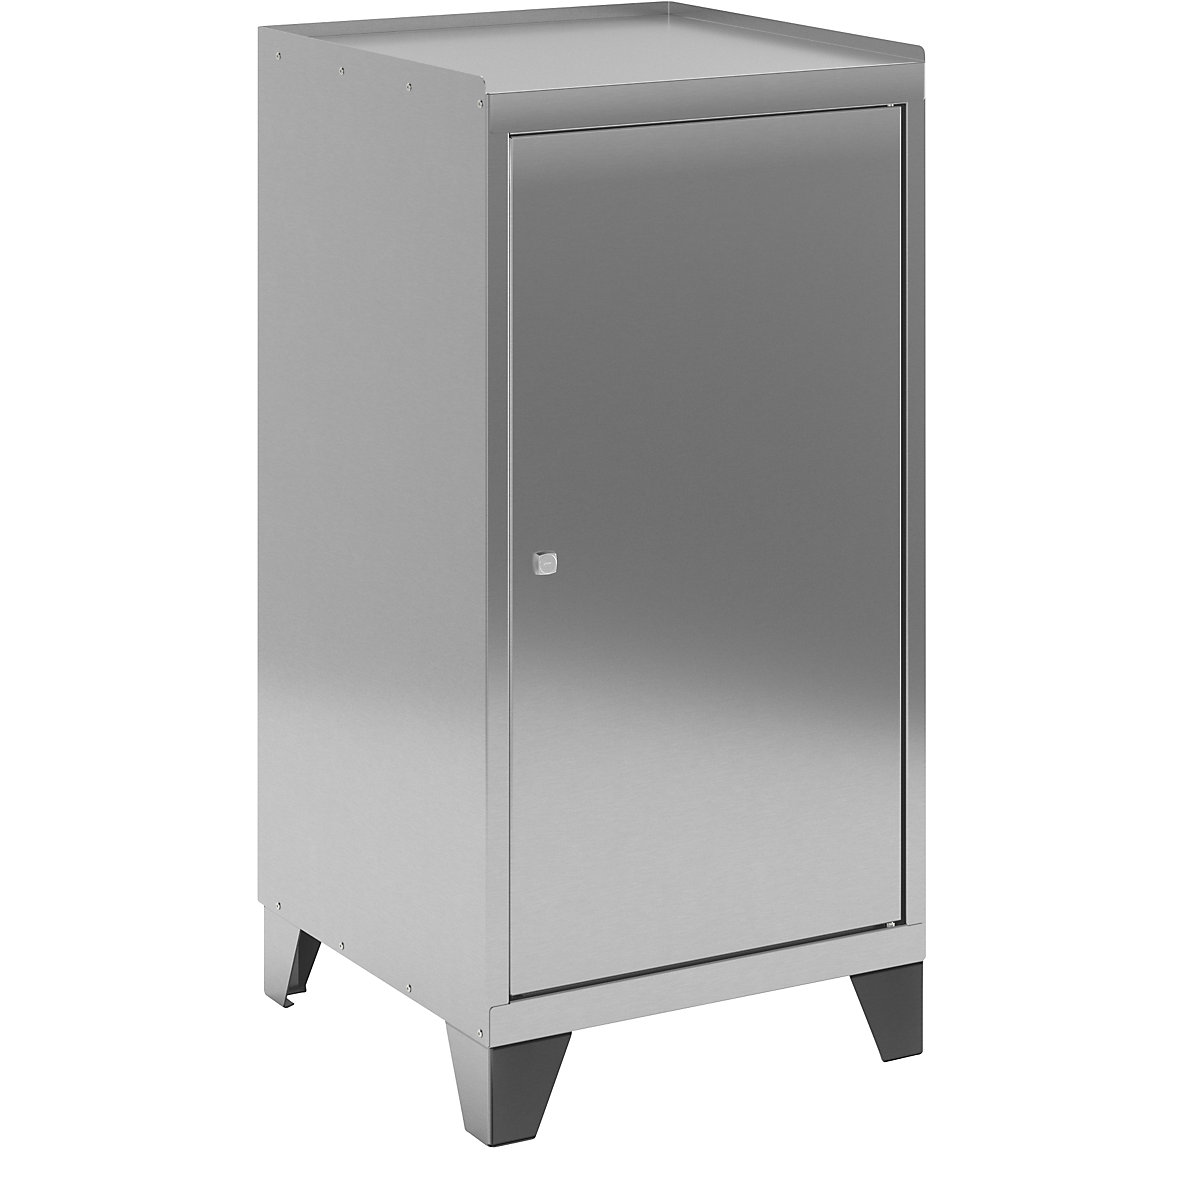 Stainless steel tool cupboard with stud feet